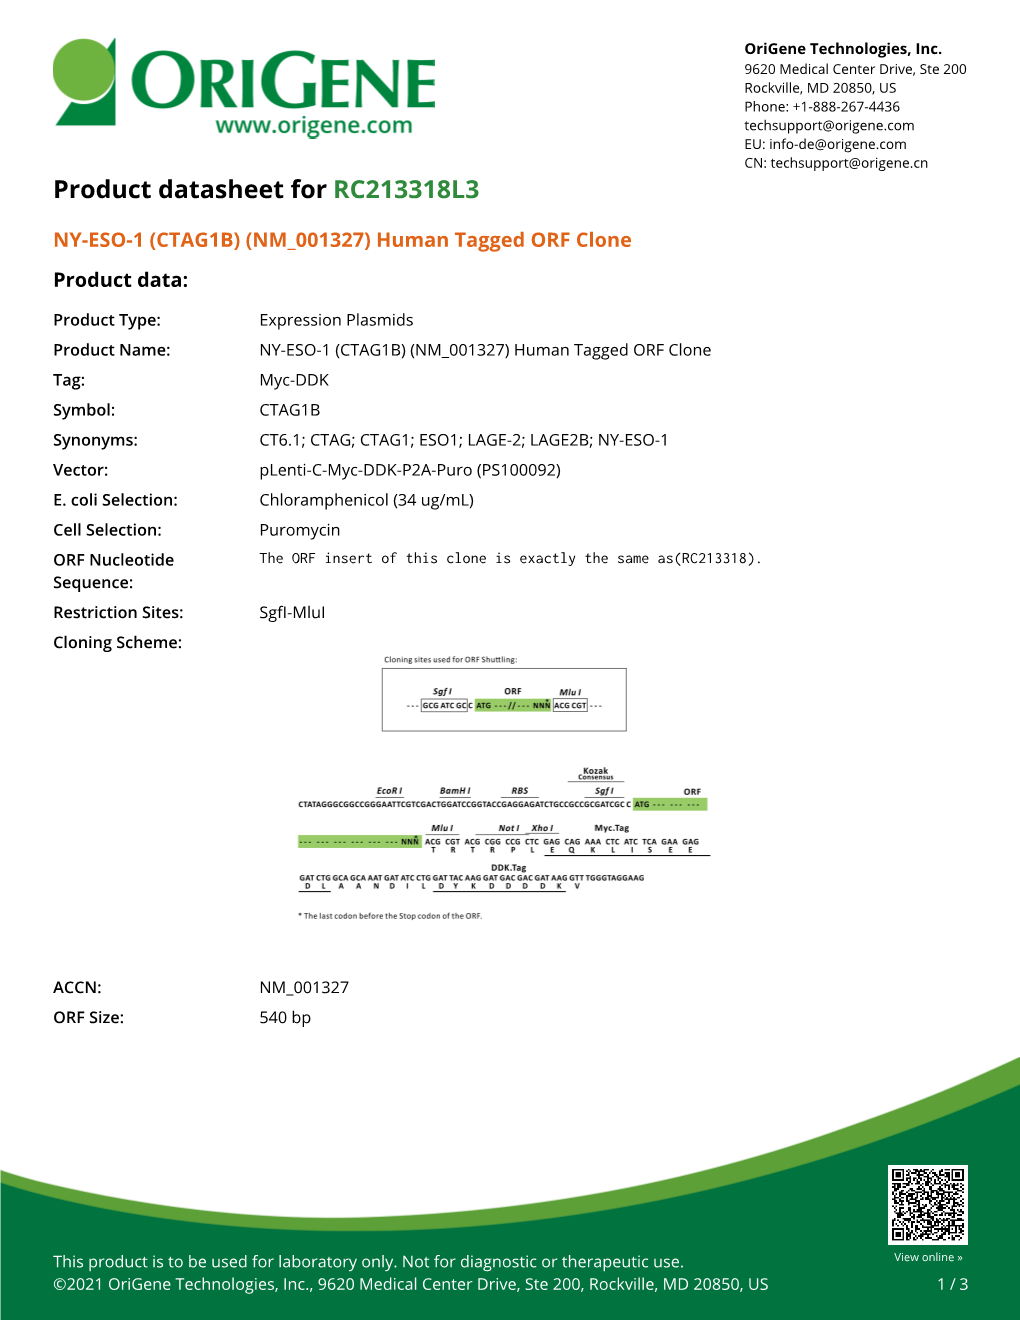 (CTAG1B) (NM 001327) Human Tagged ORF Clone Product Data